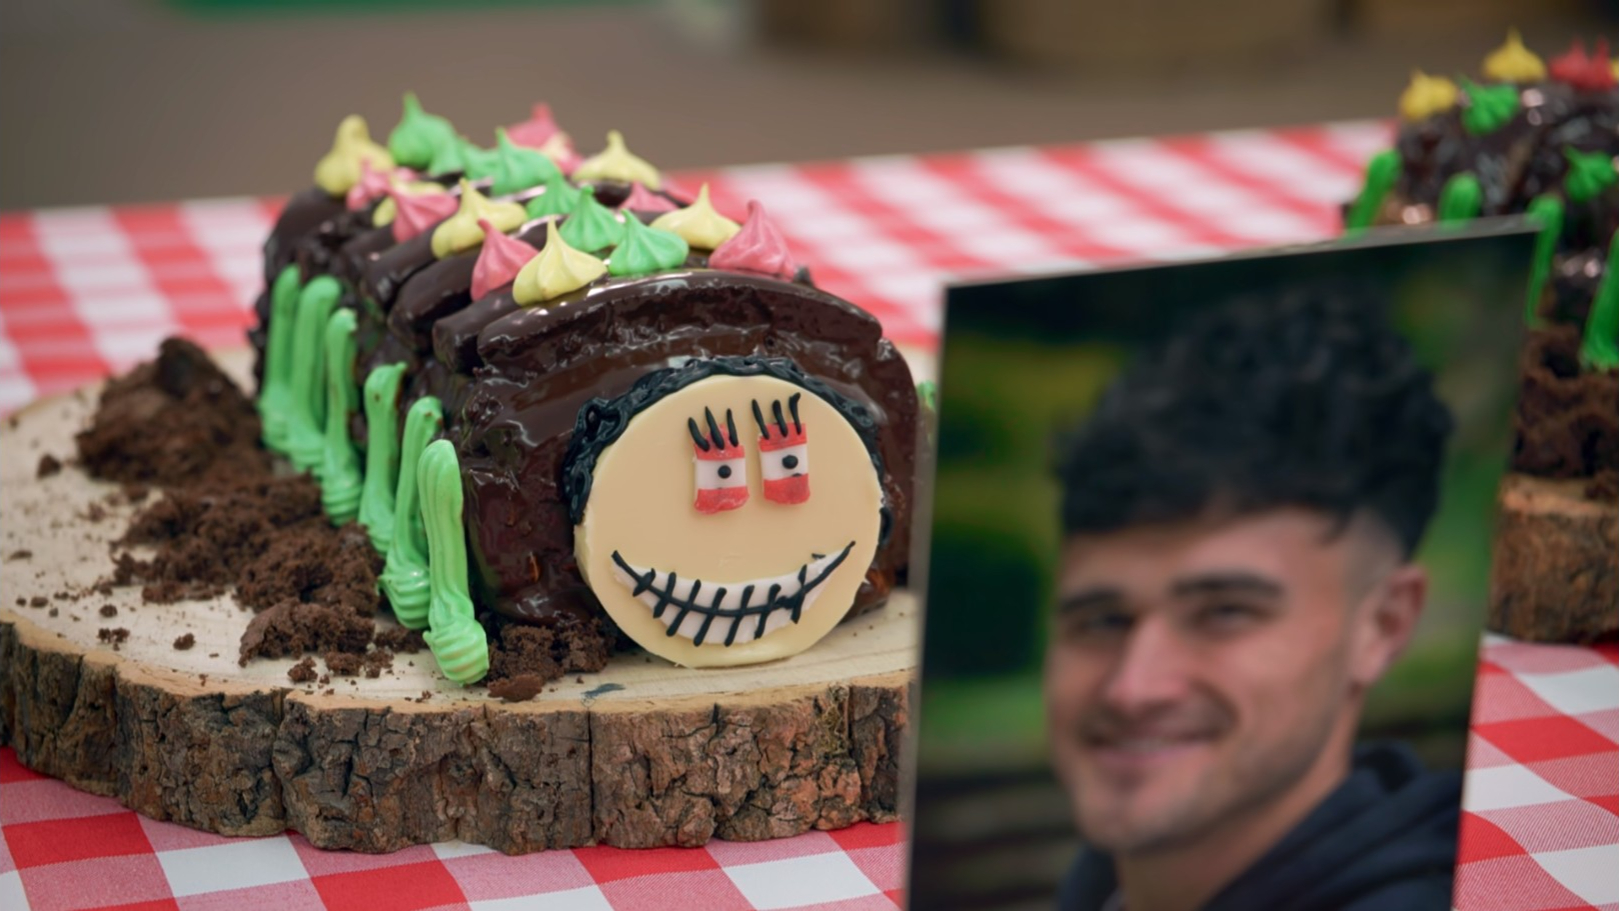 Matty's The Very Punky Caterpillar Technical from 'The Great British Baking Show' Season 14's "Party Week"